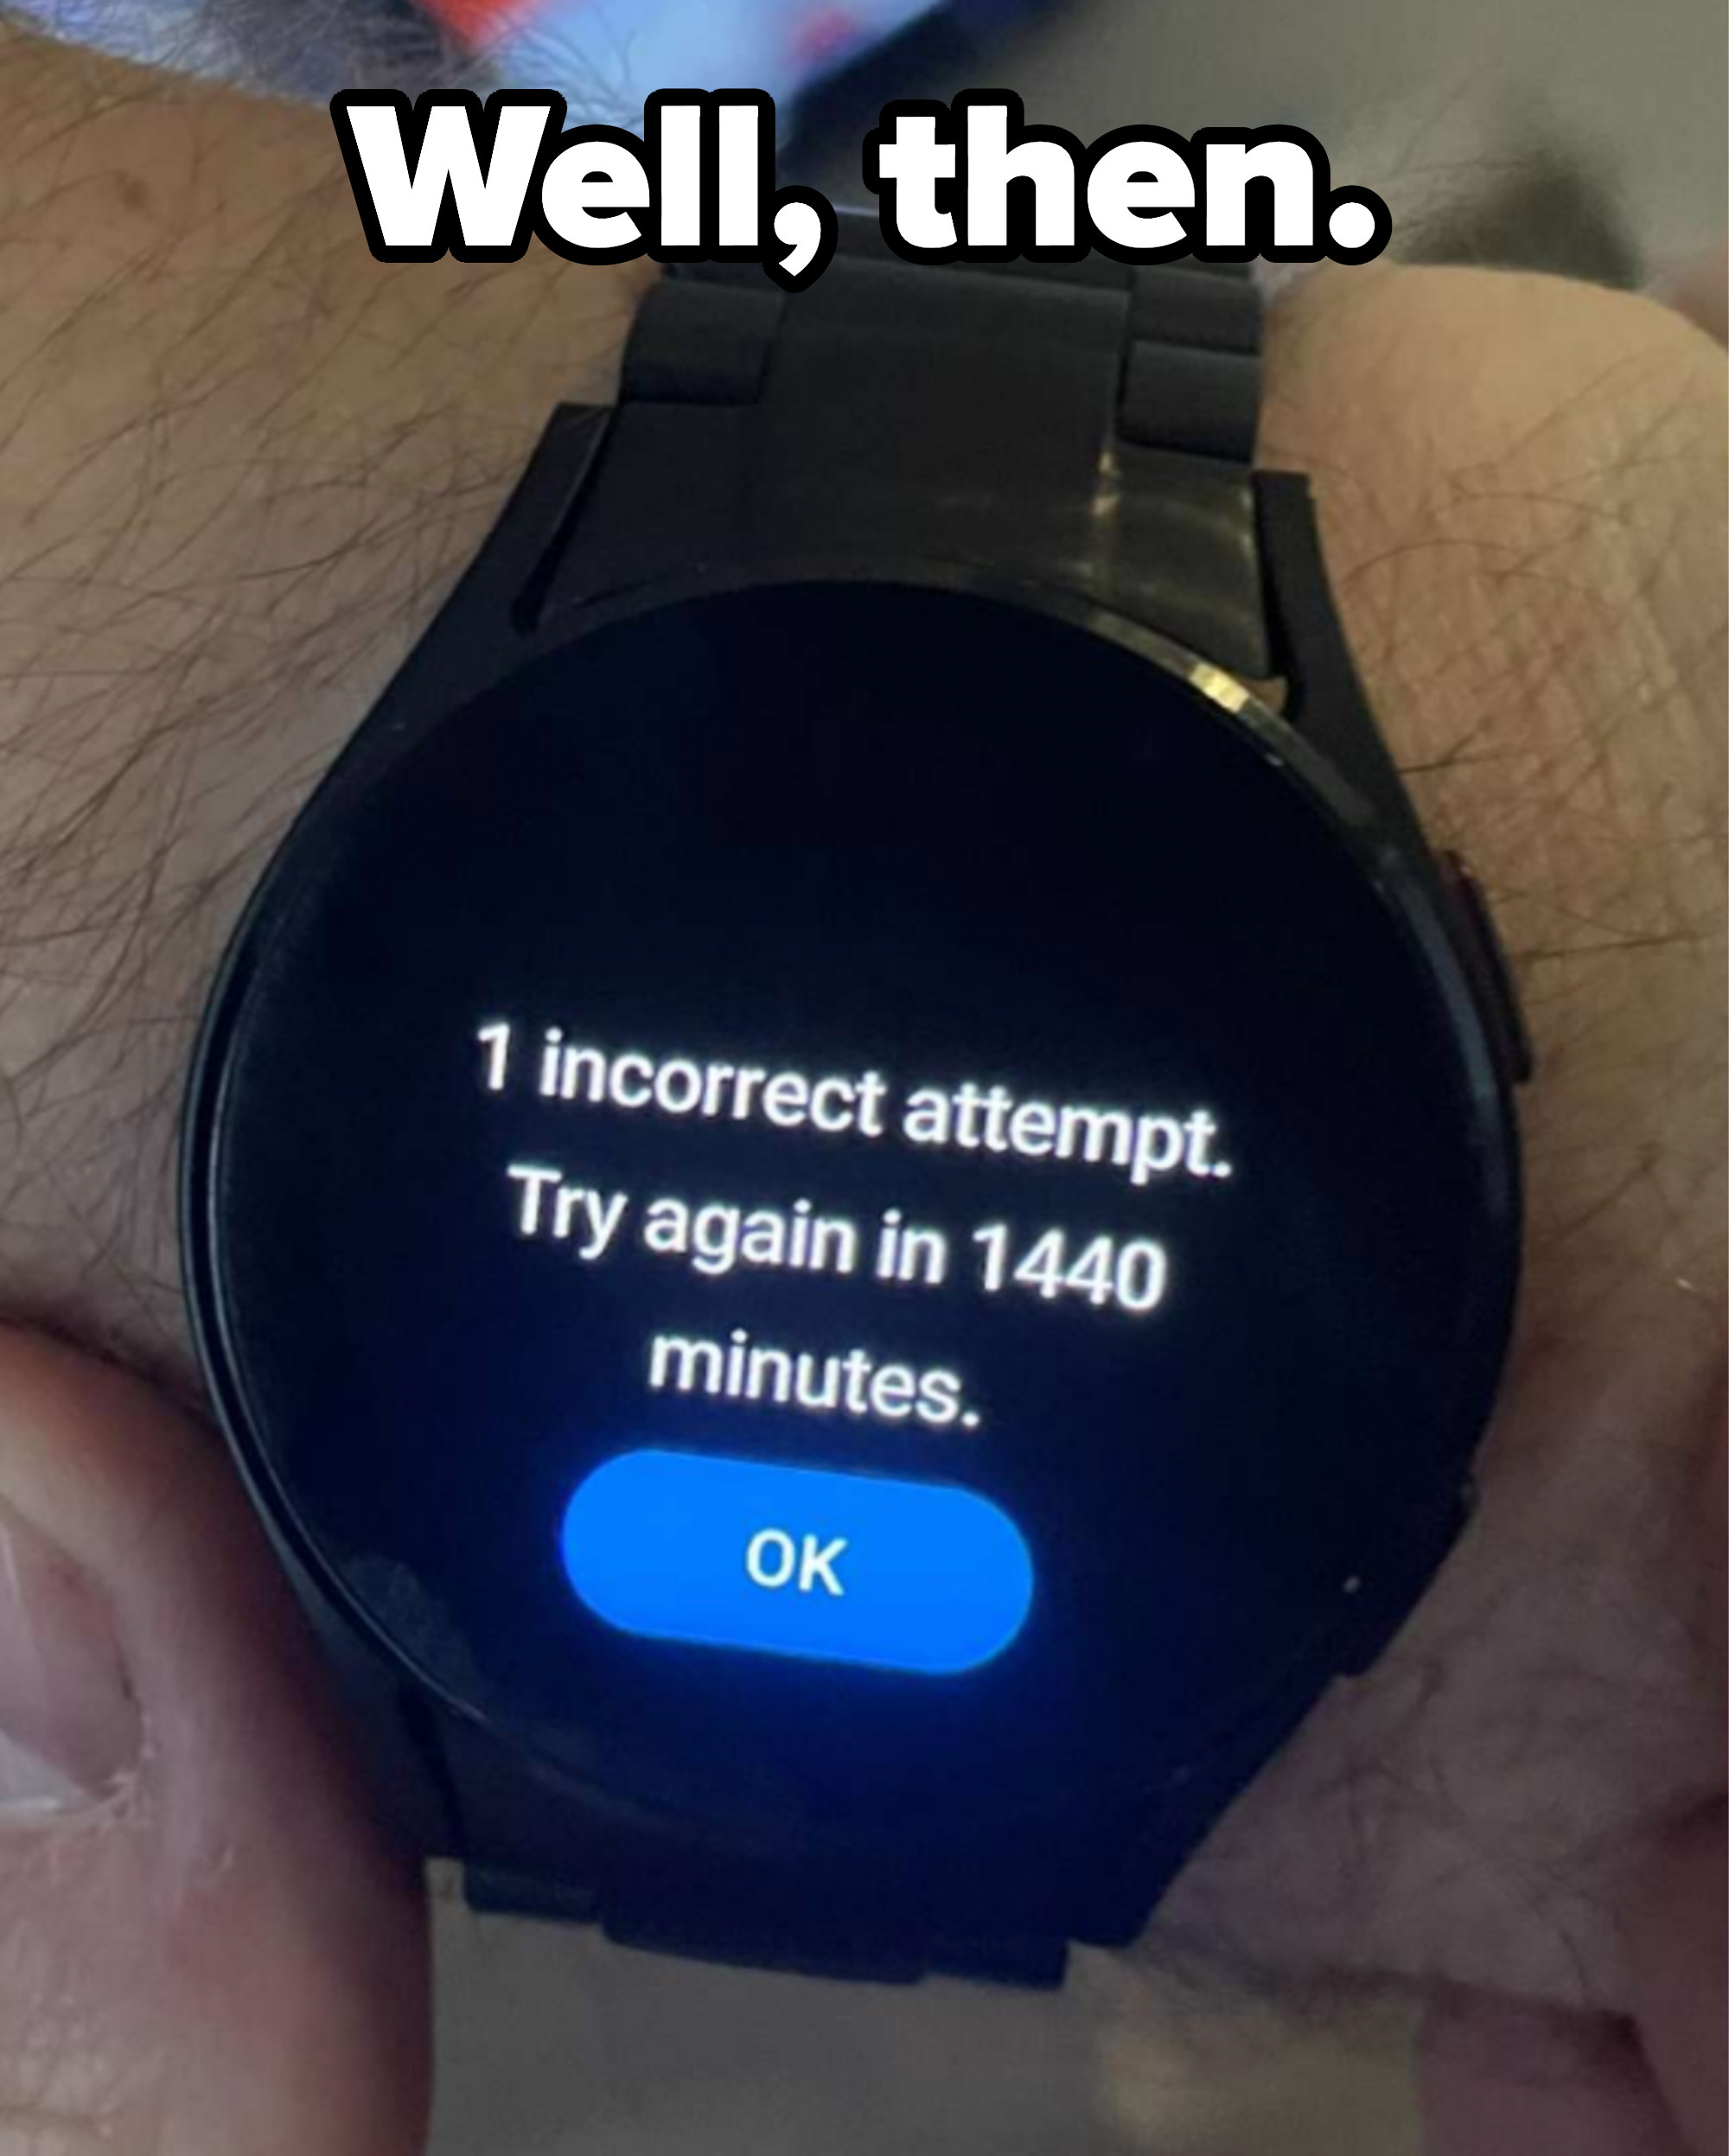 &quot;1 incorrect attempt. Try again in 1440 minutes.&quot;